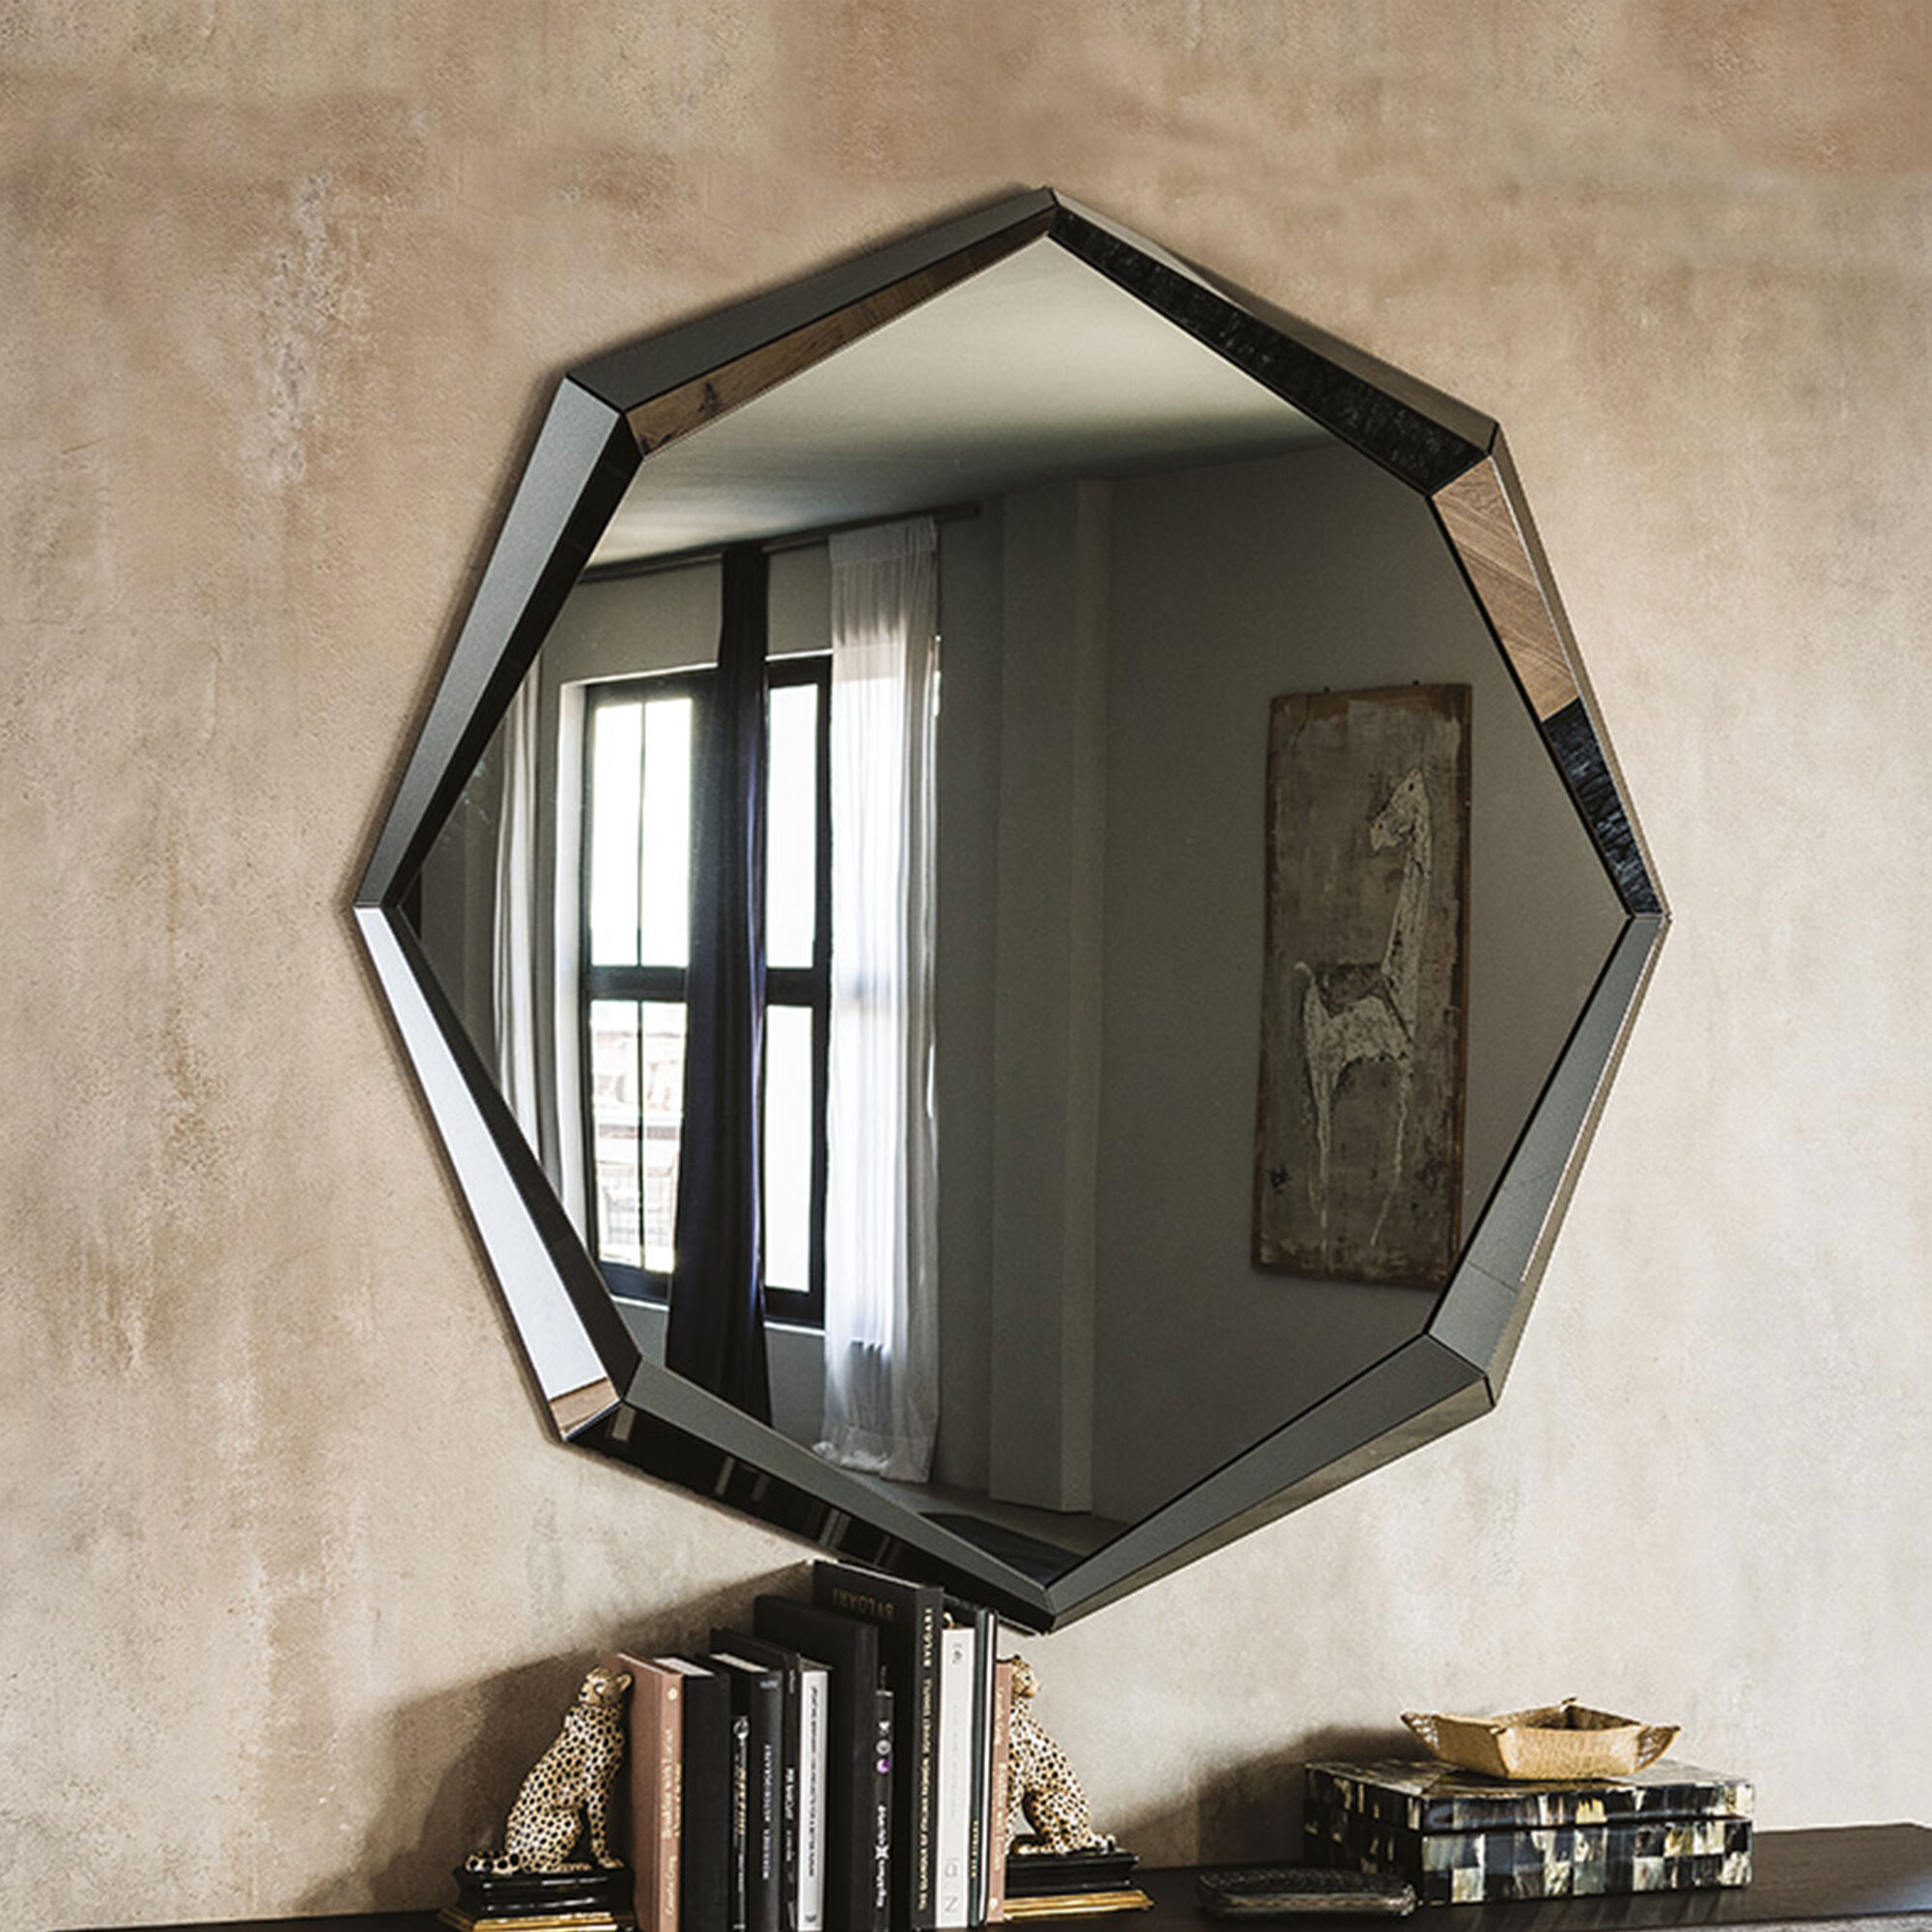 Cattelan Italia Emerald Wall Mounted Mirror 130 x 130cm, Round, Silver Glass - Barker & Stonehouse - image 1